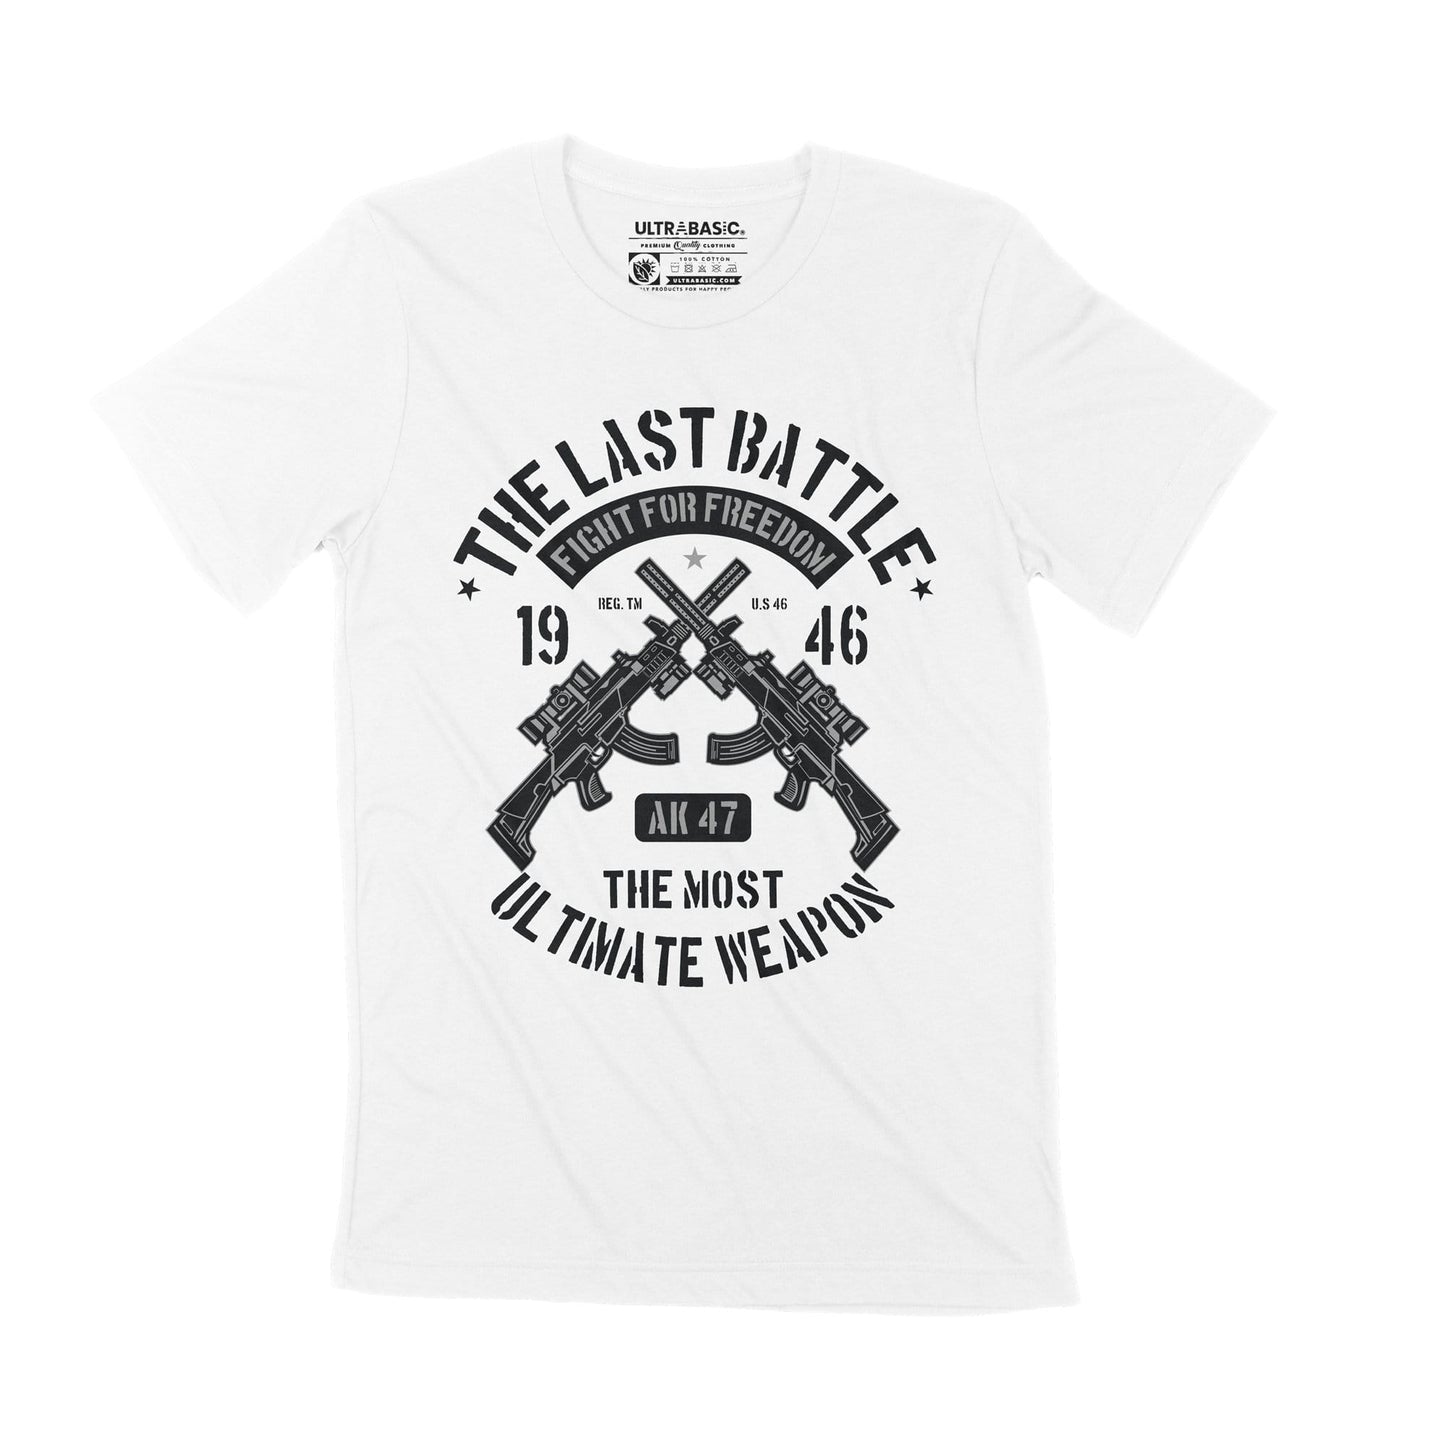 ULTRABASIC Men's Graphic T-Shirt The Last Battle 1946 - The Most Ultimate Weapon